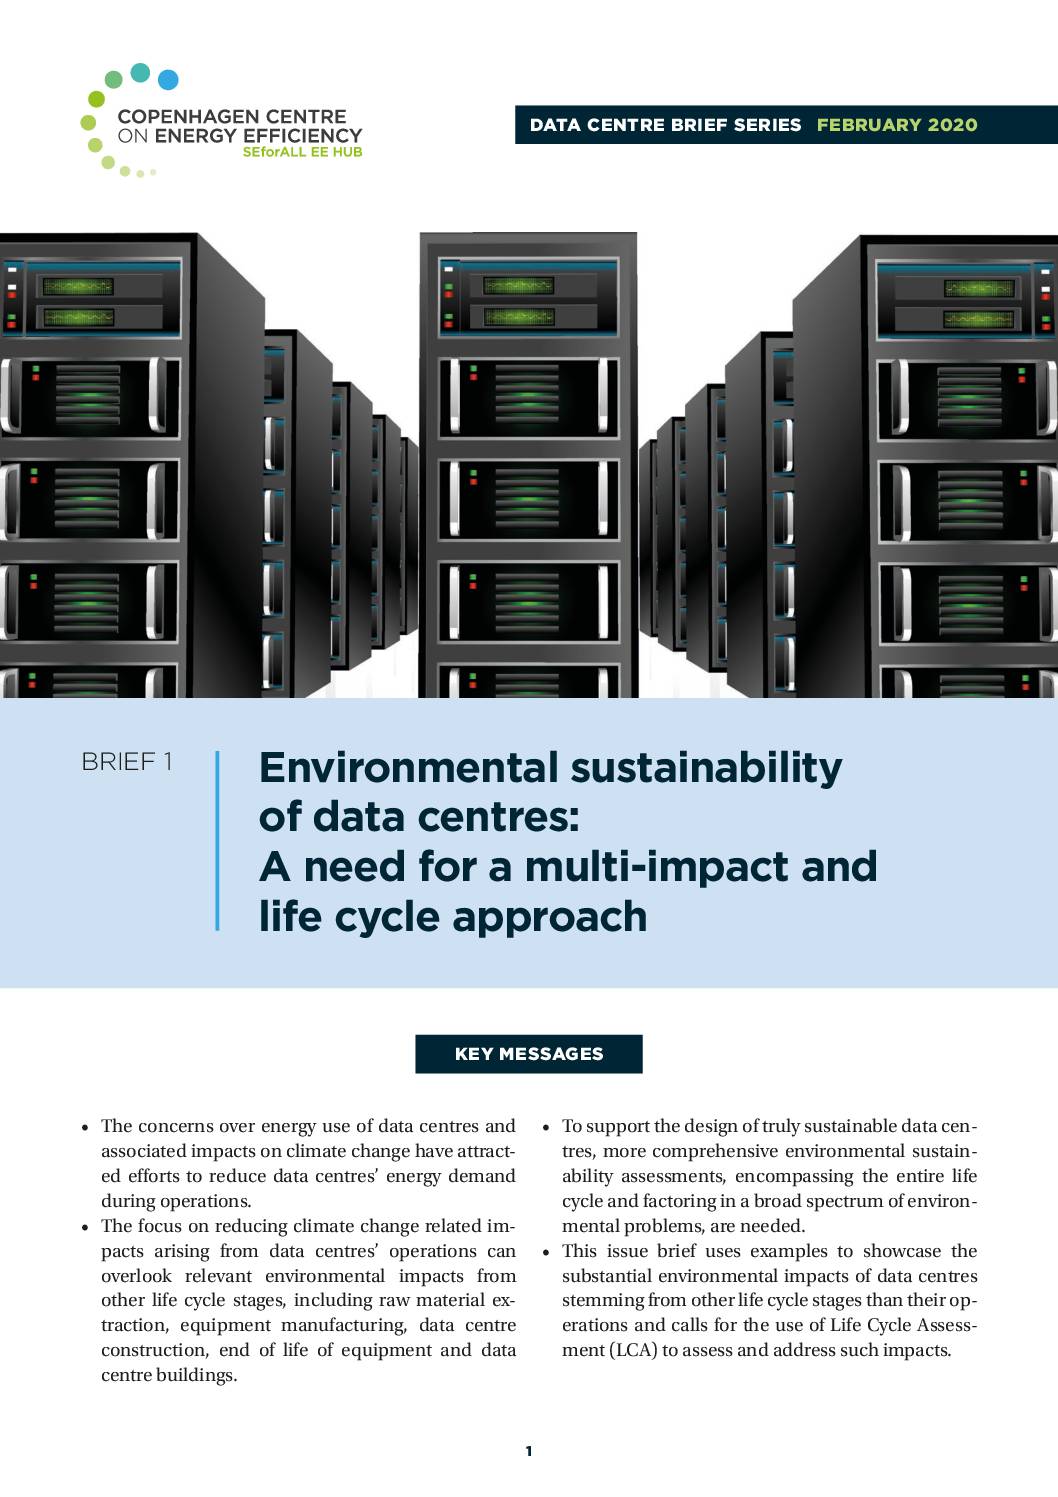 Environmental sustainability of data centres: A need for a multi-impact and life cycle approach